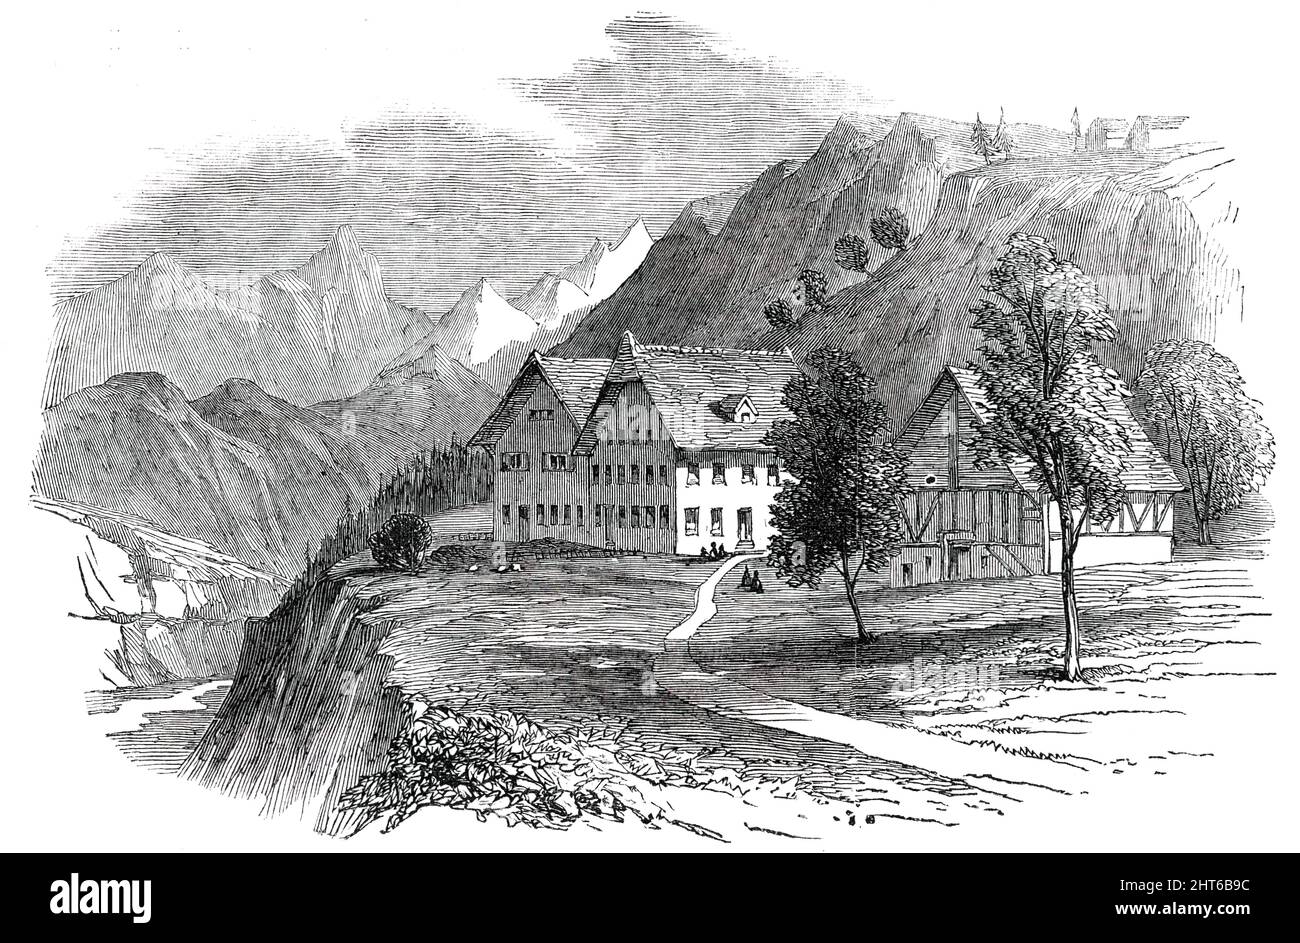 Institution for Cretins at Interlacken, Switzerland, 1850. 'Dr. Guggenb&#xfc;hl had ascertained that Cretinism never exists above a certain elevation on the mountains; therefore, the first requisite for the Institution was a lofty position. The Abendberg is 3000 feet above the sea level...sheltered from the storms that are frequently very destructive in the immediate neighbourhood, and enjoying an unusual portion of sun in so alpine a situation...More than 300 Cretin children have been admitted... About one-third have returned home cured, healthy and active, fully developed in body and mind... Stock Photo